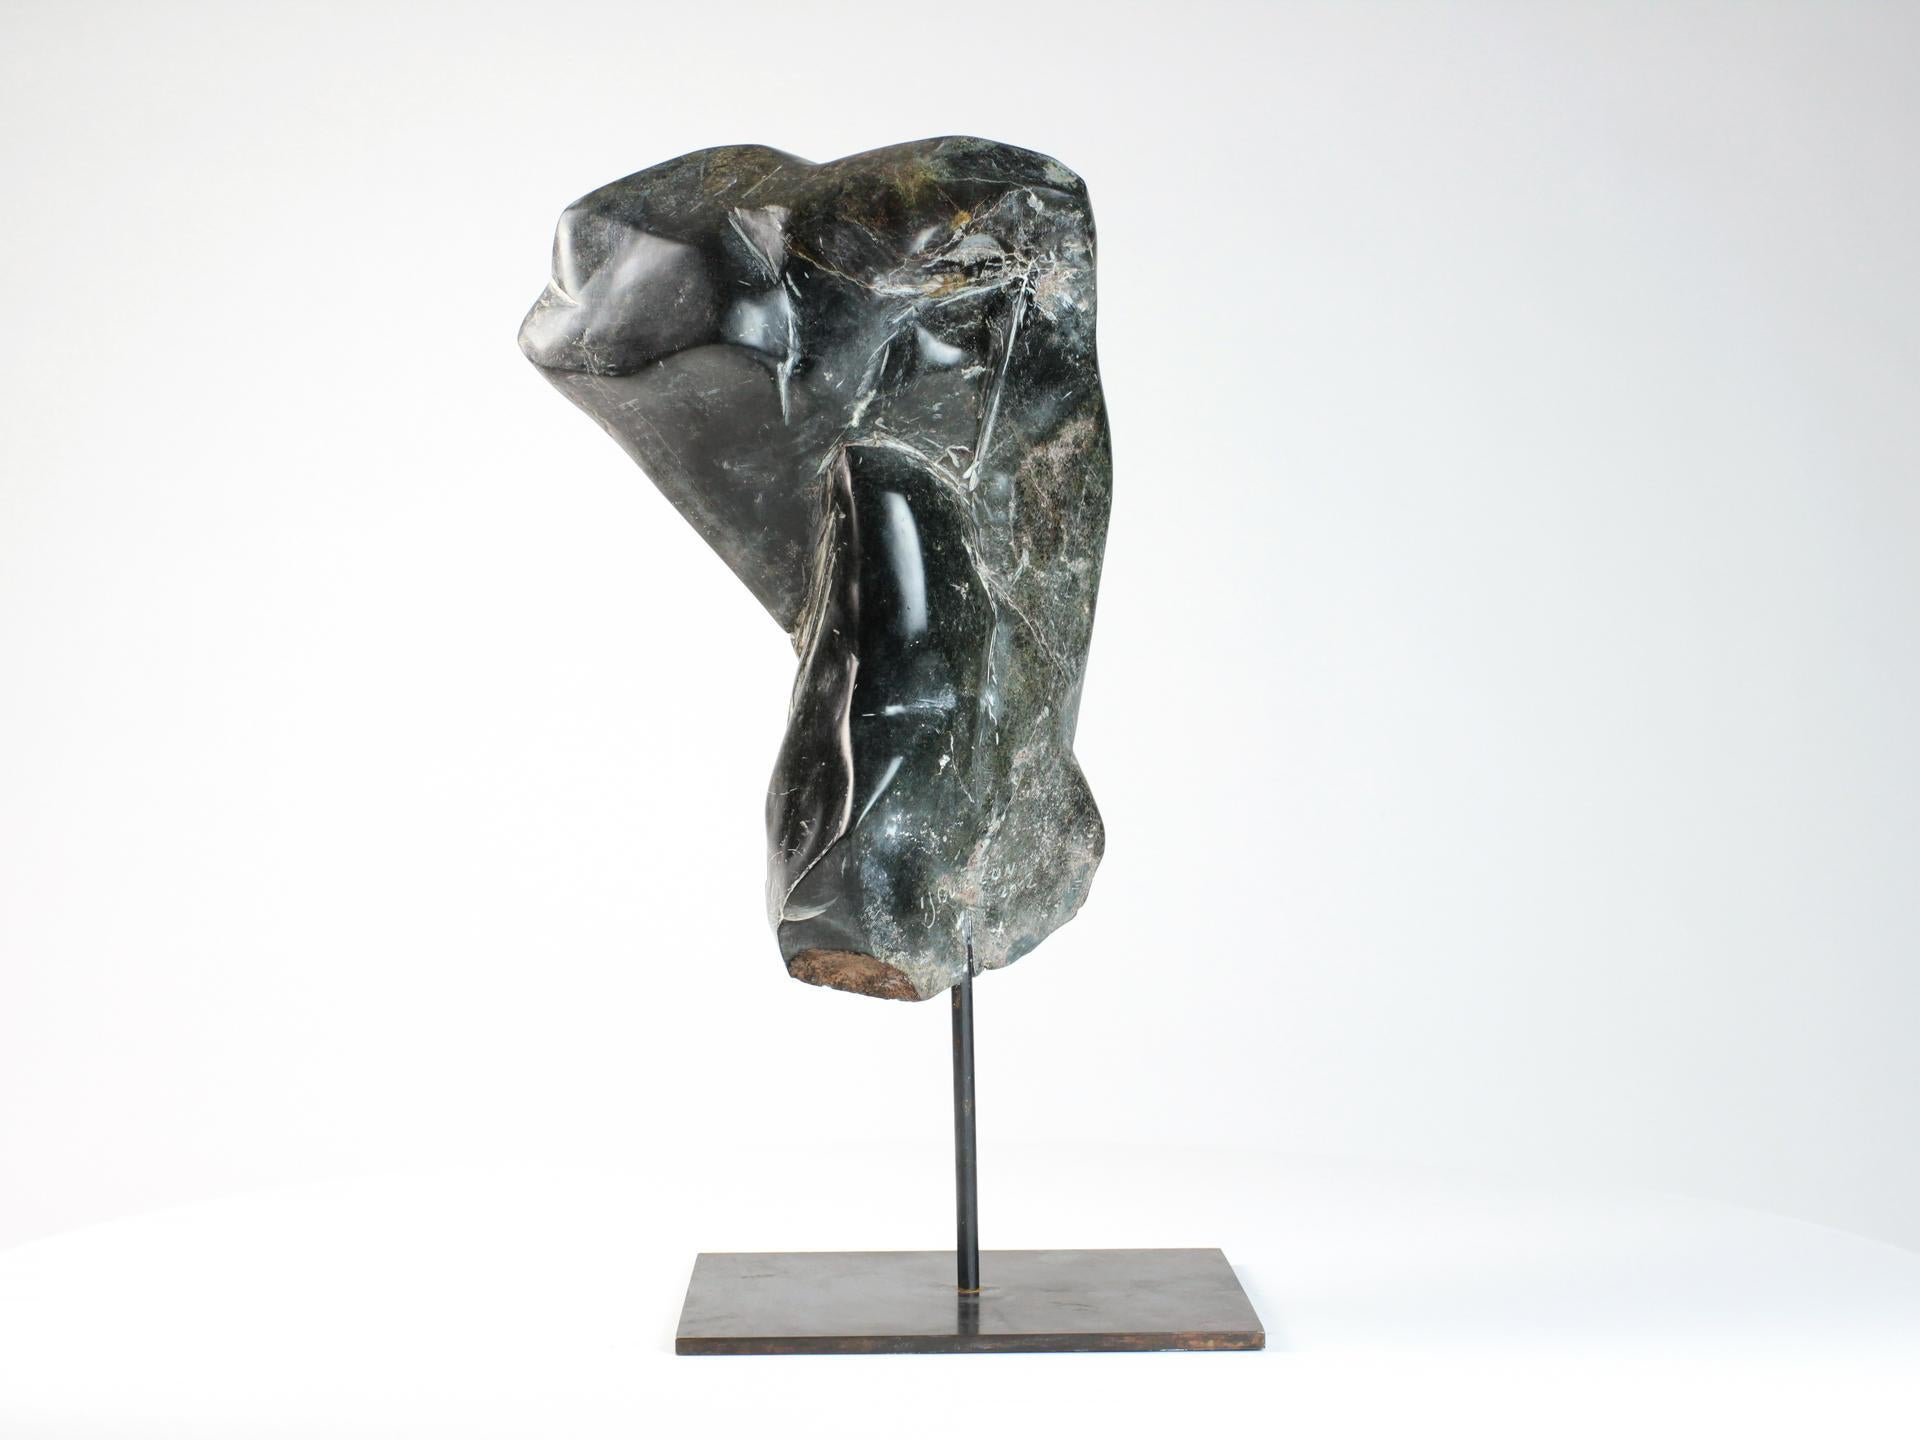 The Energy is a unique stone sculpture (steatite) by contemporary artist Yann Guillon, dimensions are 38 × 26 × 14 cm (15 × 10.2 × 5.5 in). Dimensions of the metal base: 1 x 26 x 19 cm (0.3 x 10.2 x 7.4 in). Height of the sculpture with the metal